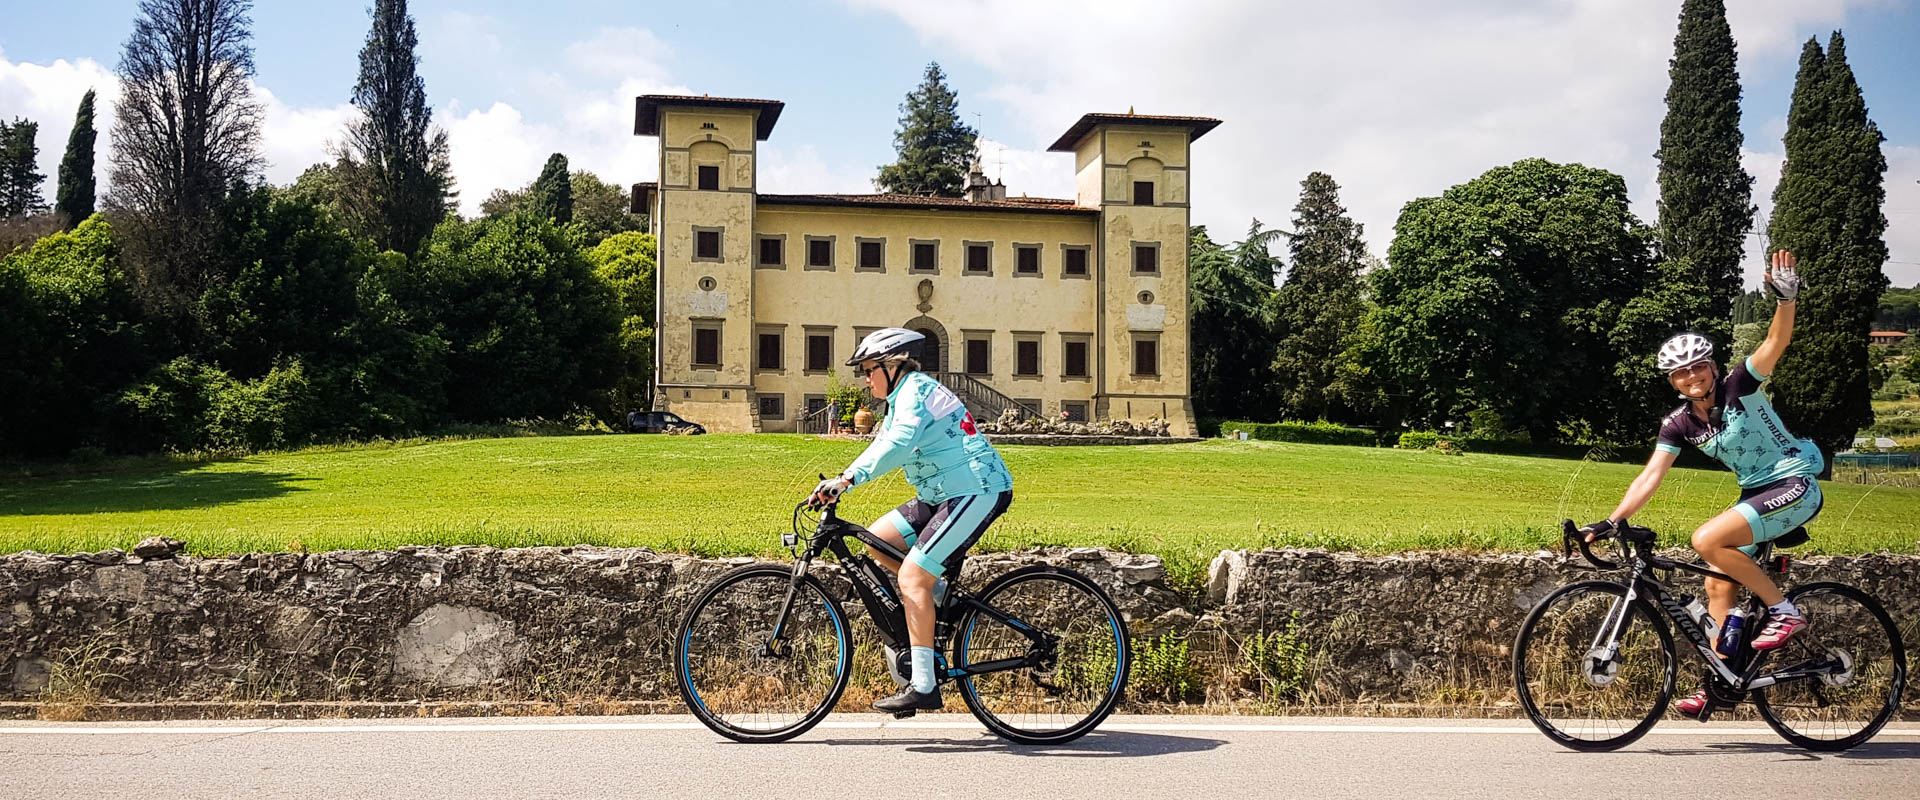 Tour of Tuscany - Italian Cycling Holiday with Topbike Tours